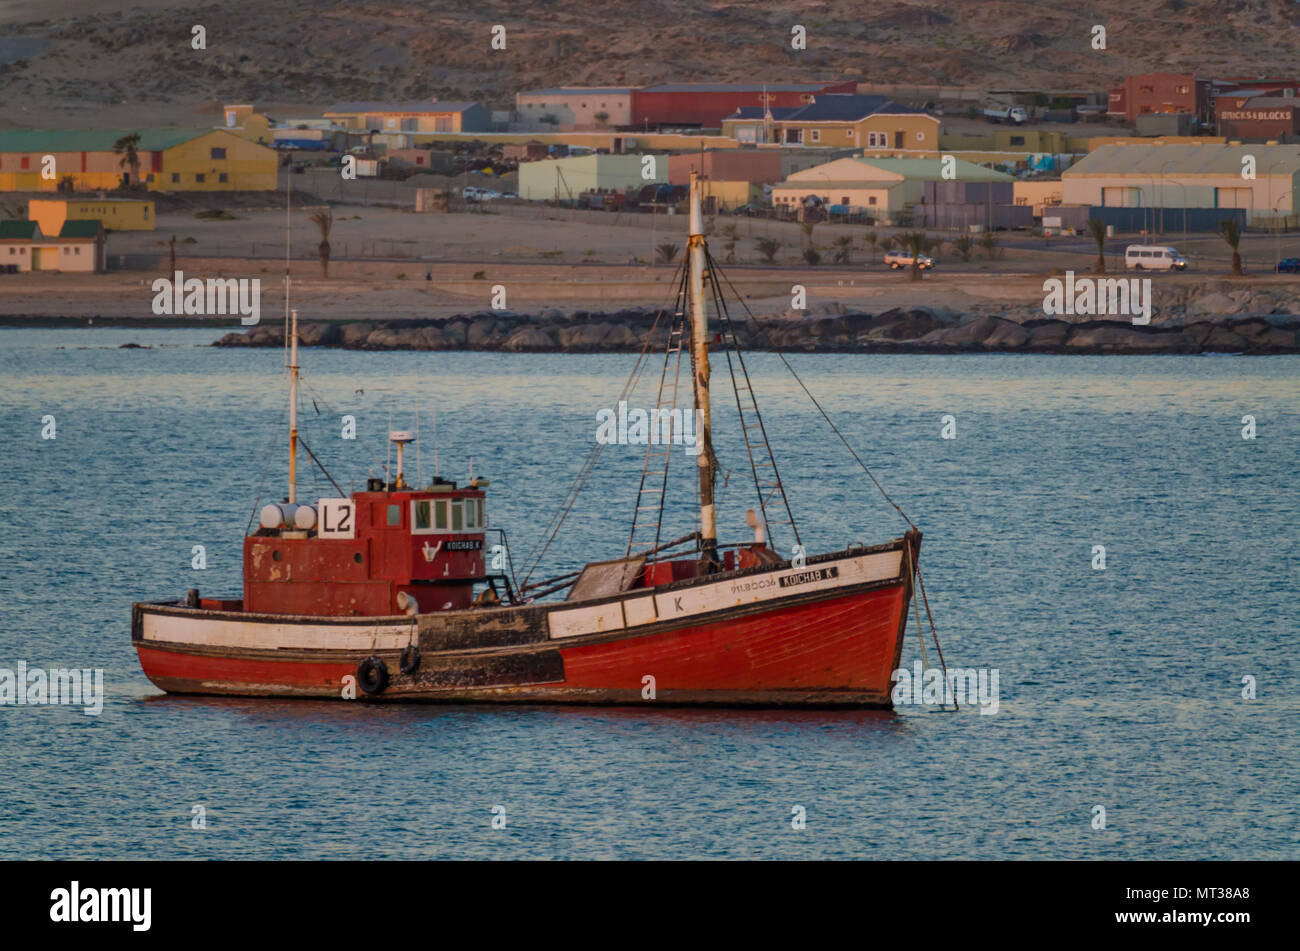 Luderitz, Namibia - July 09 2014: Old red wooden fishing boat in bay at Luderitz during evening Stock Photo